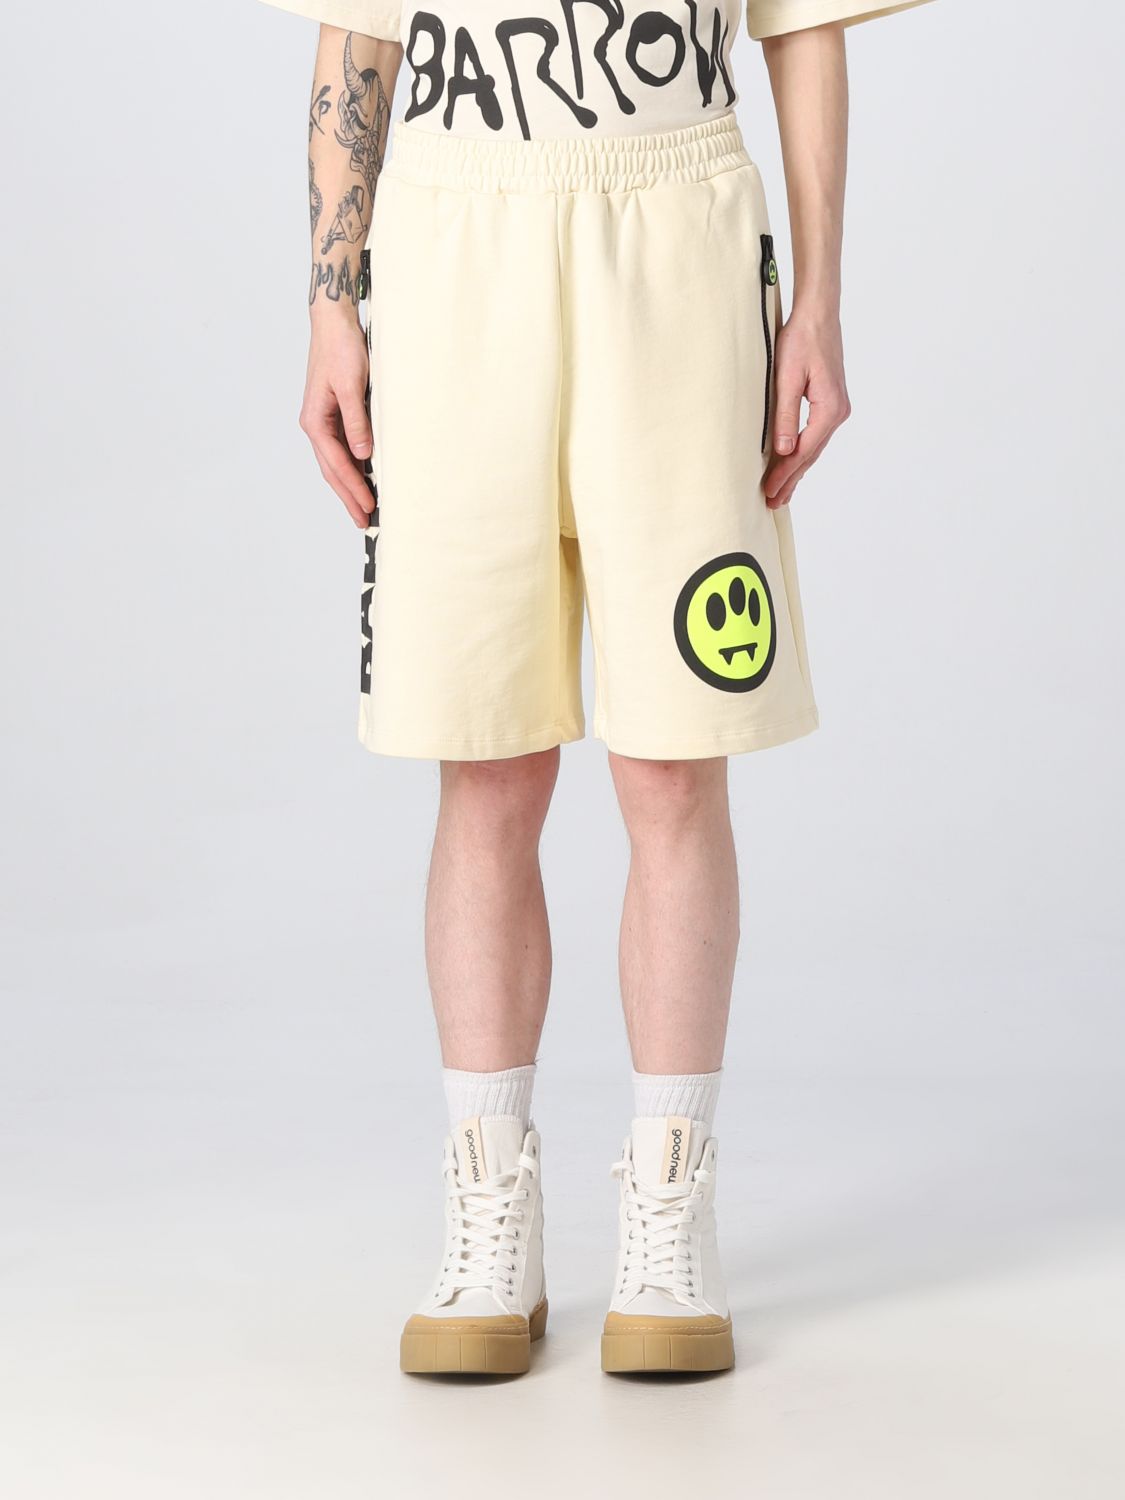 Barrow Printed Shorts In Butter